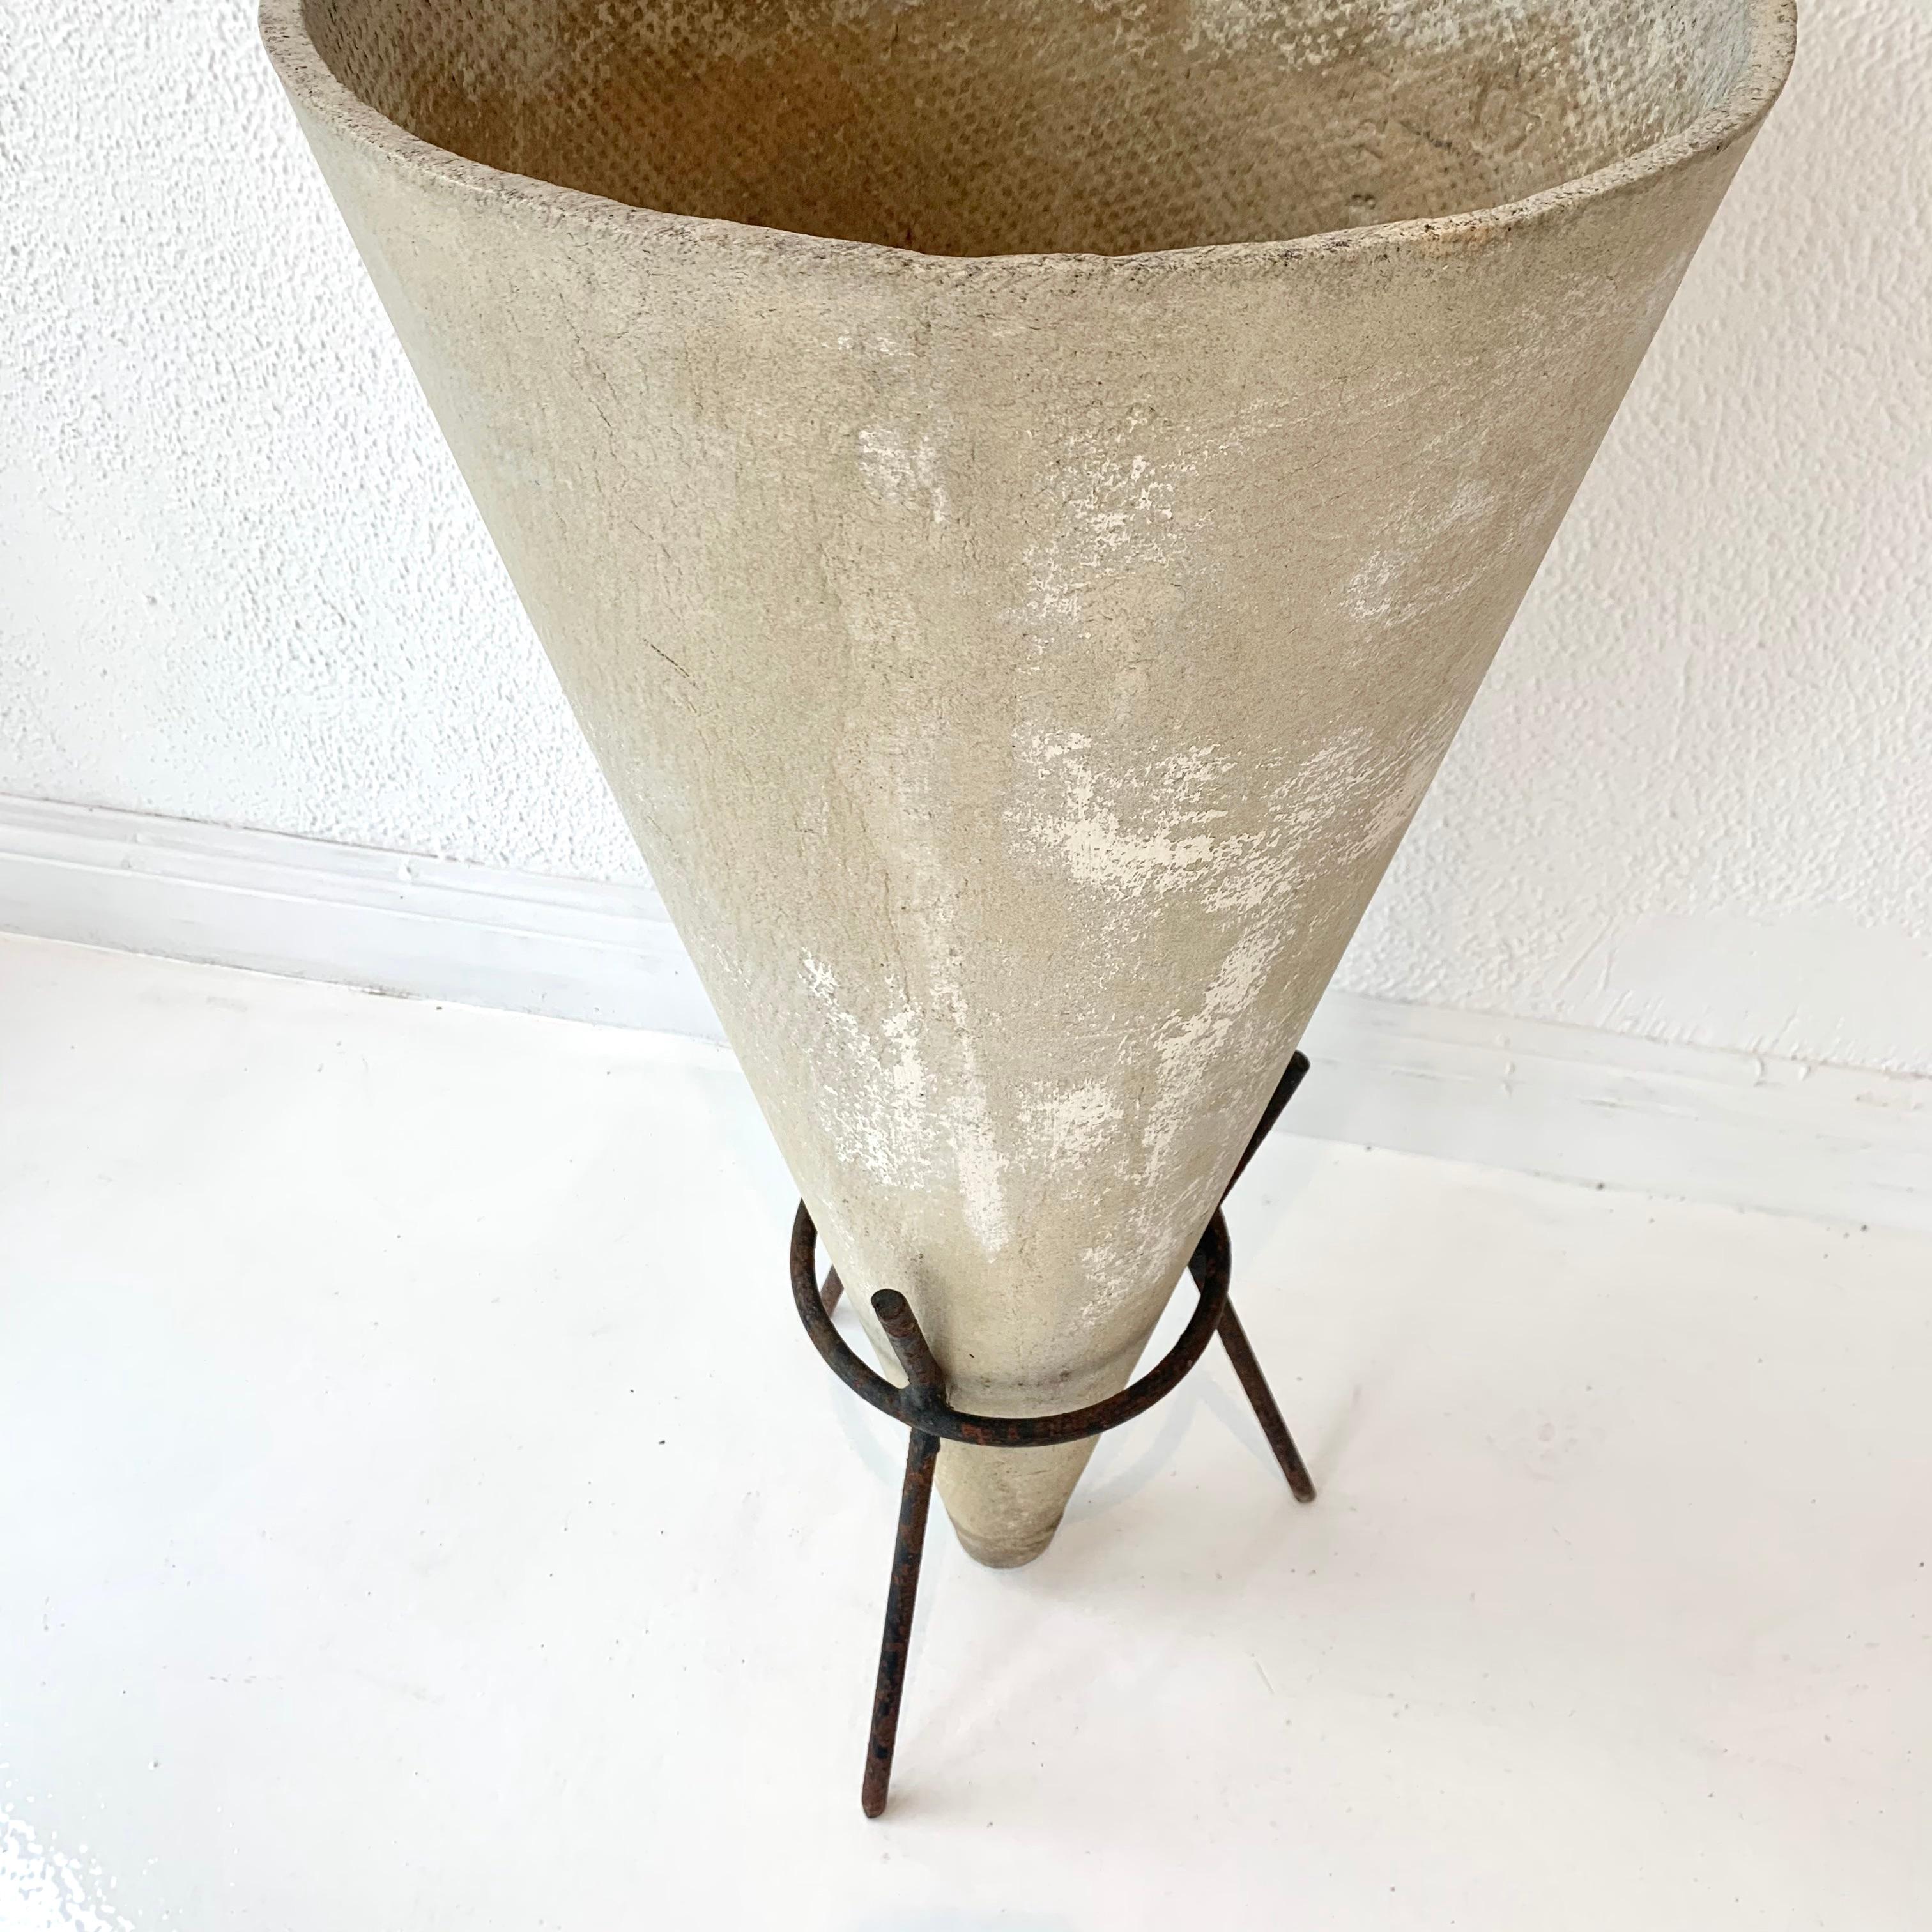 Swiss Willy Guhl Concrete Cone Planter on Iron Stand